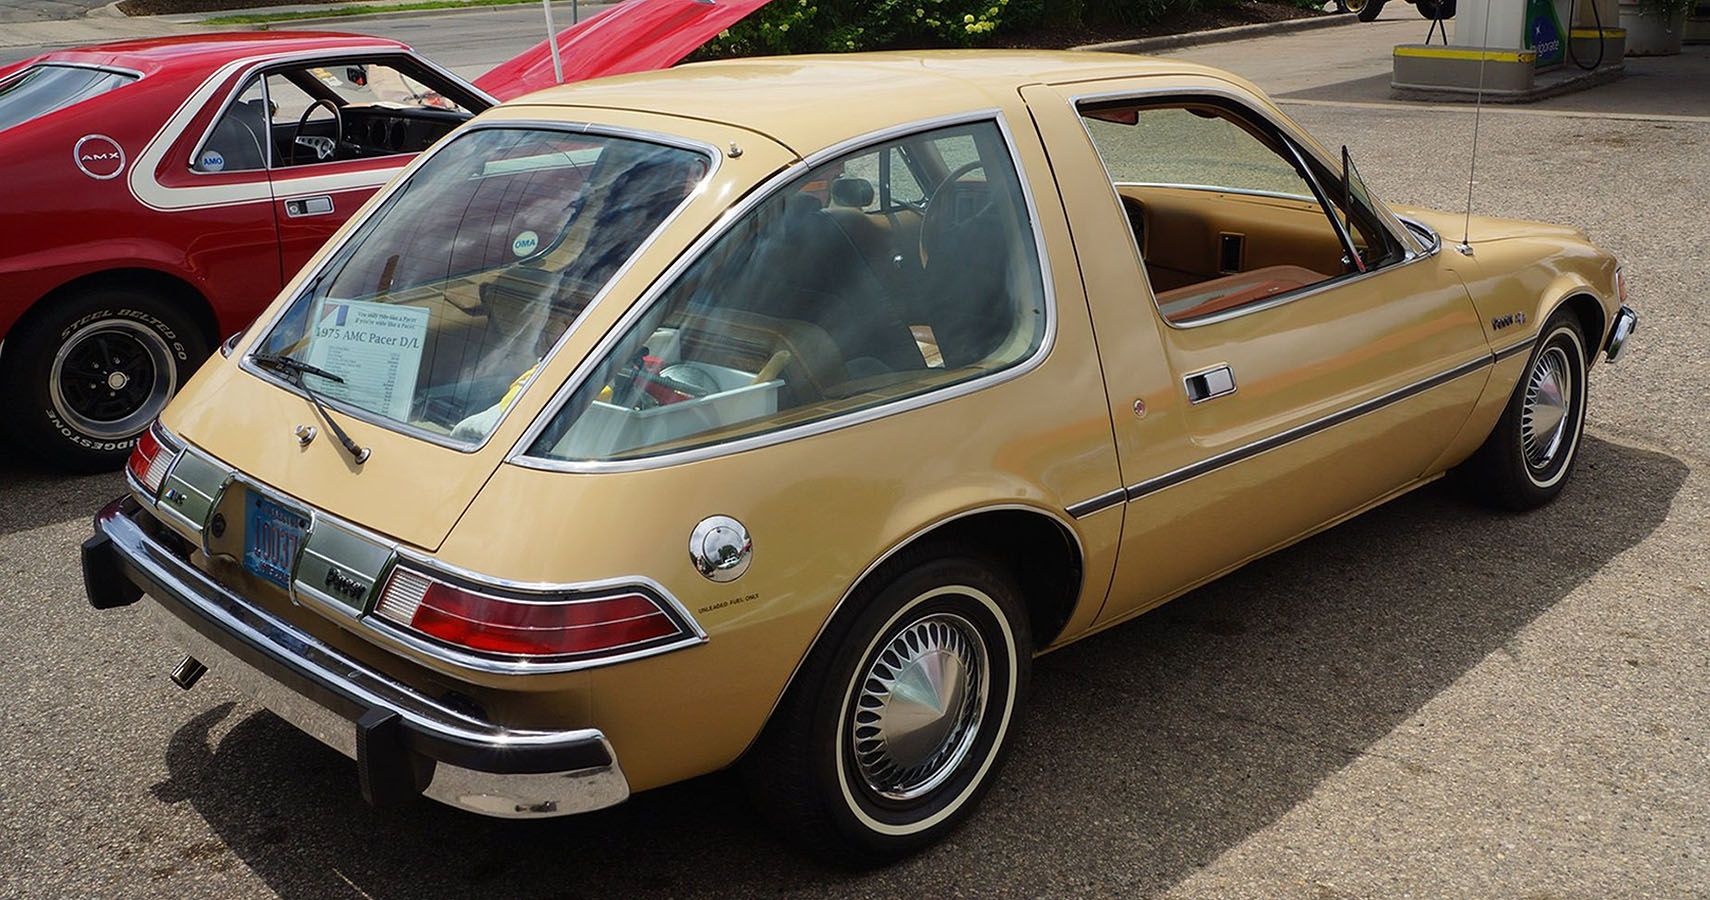 1975-1979 AMC Pacer: Wanna Ride In A Fishbowl?